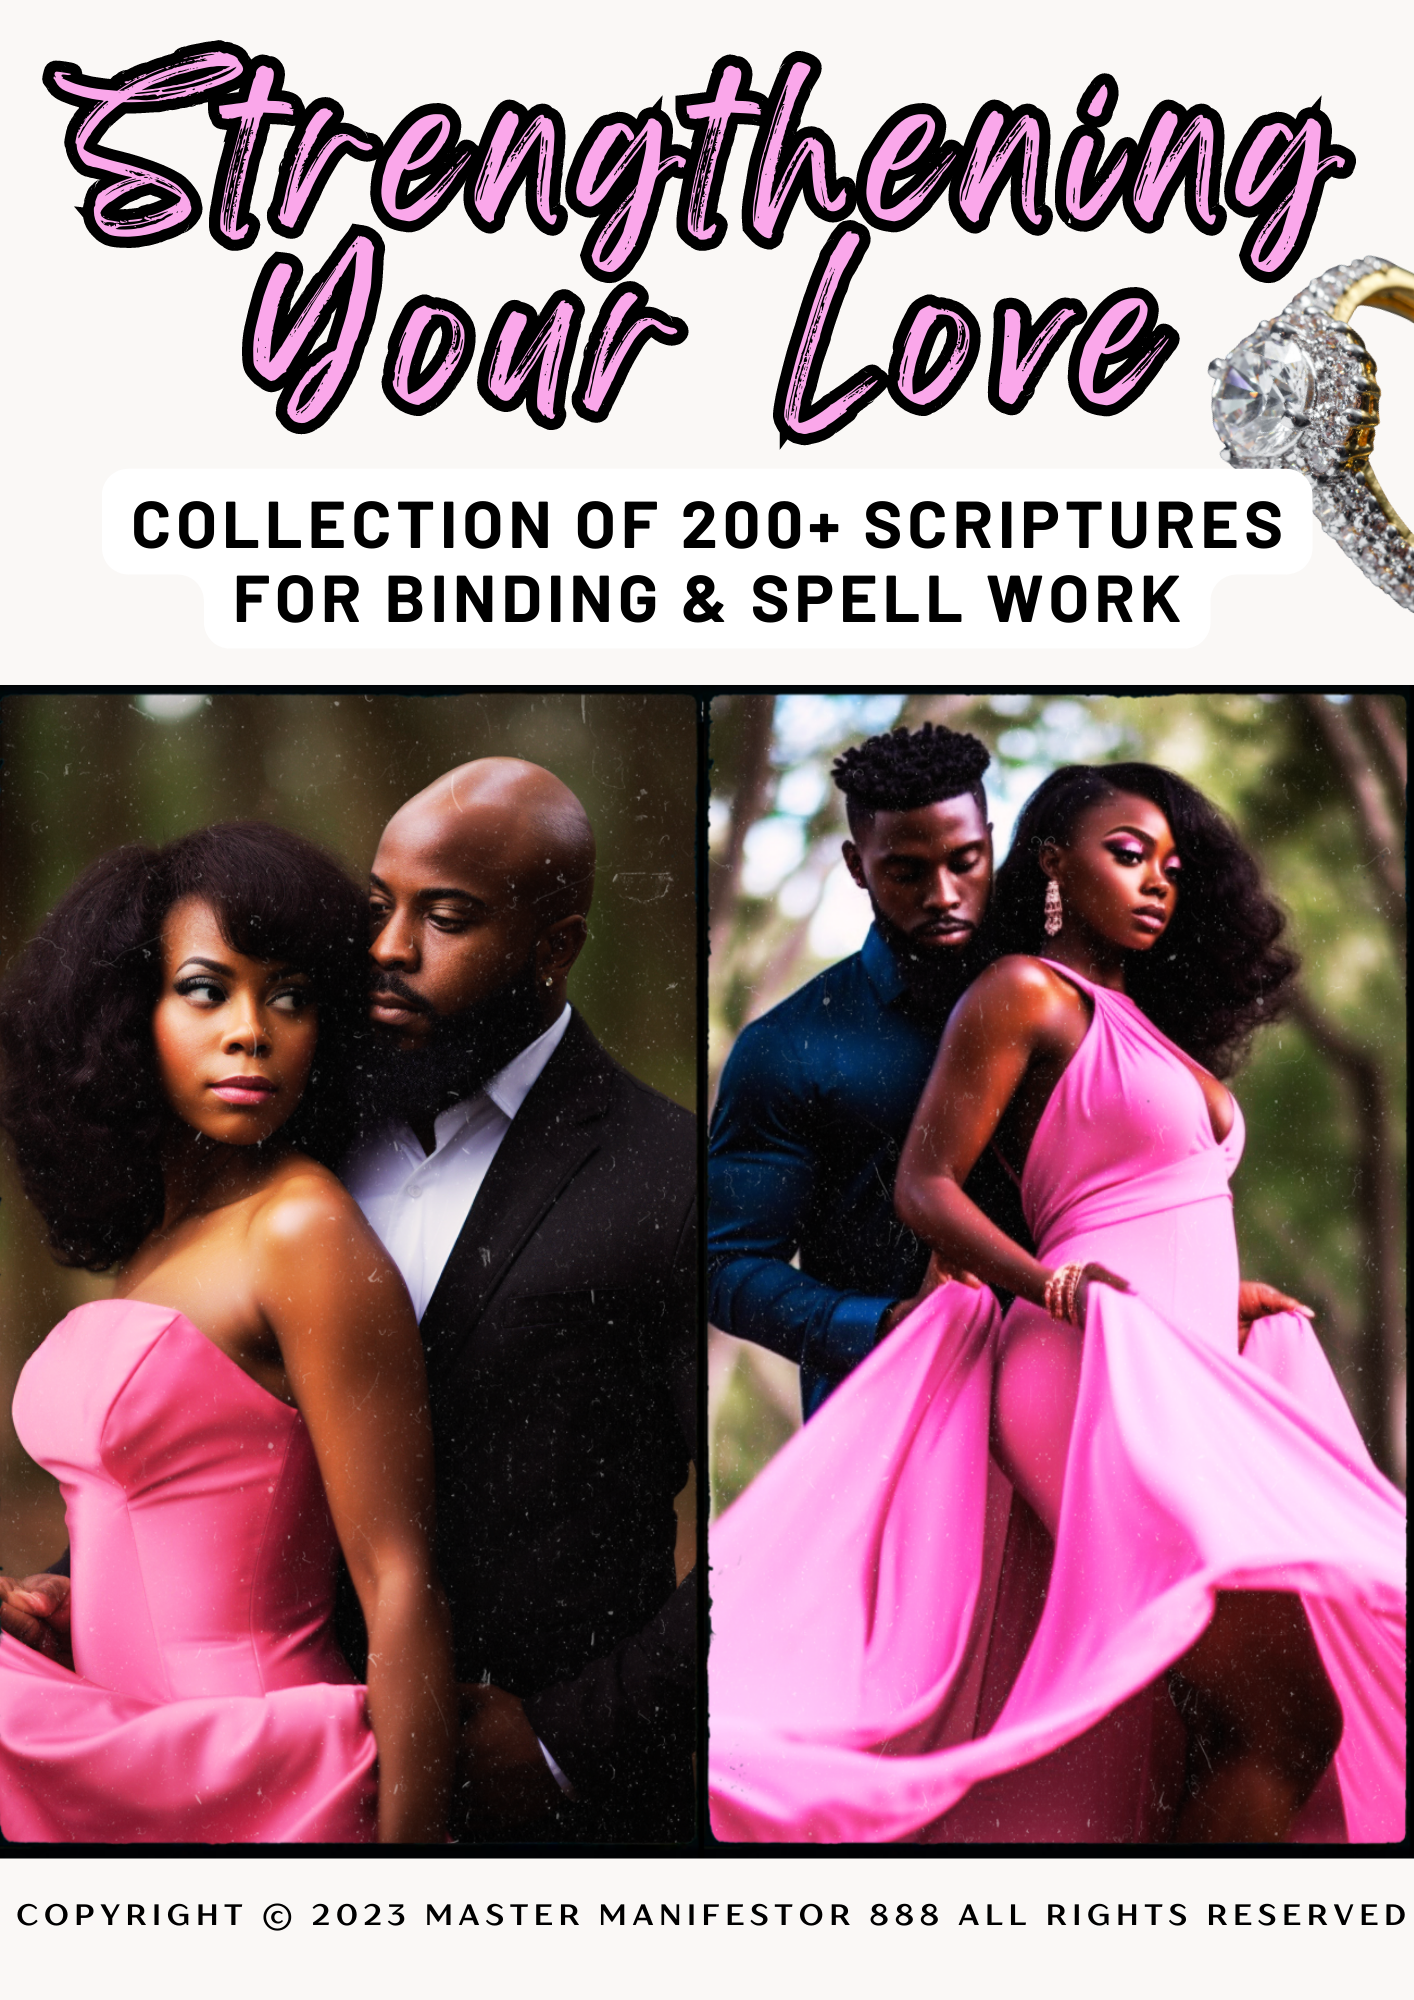 Strengthen Your Love: Collection of 200+ Scriptures for Love, Binding and Spellwork